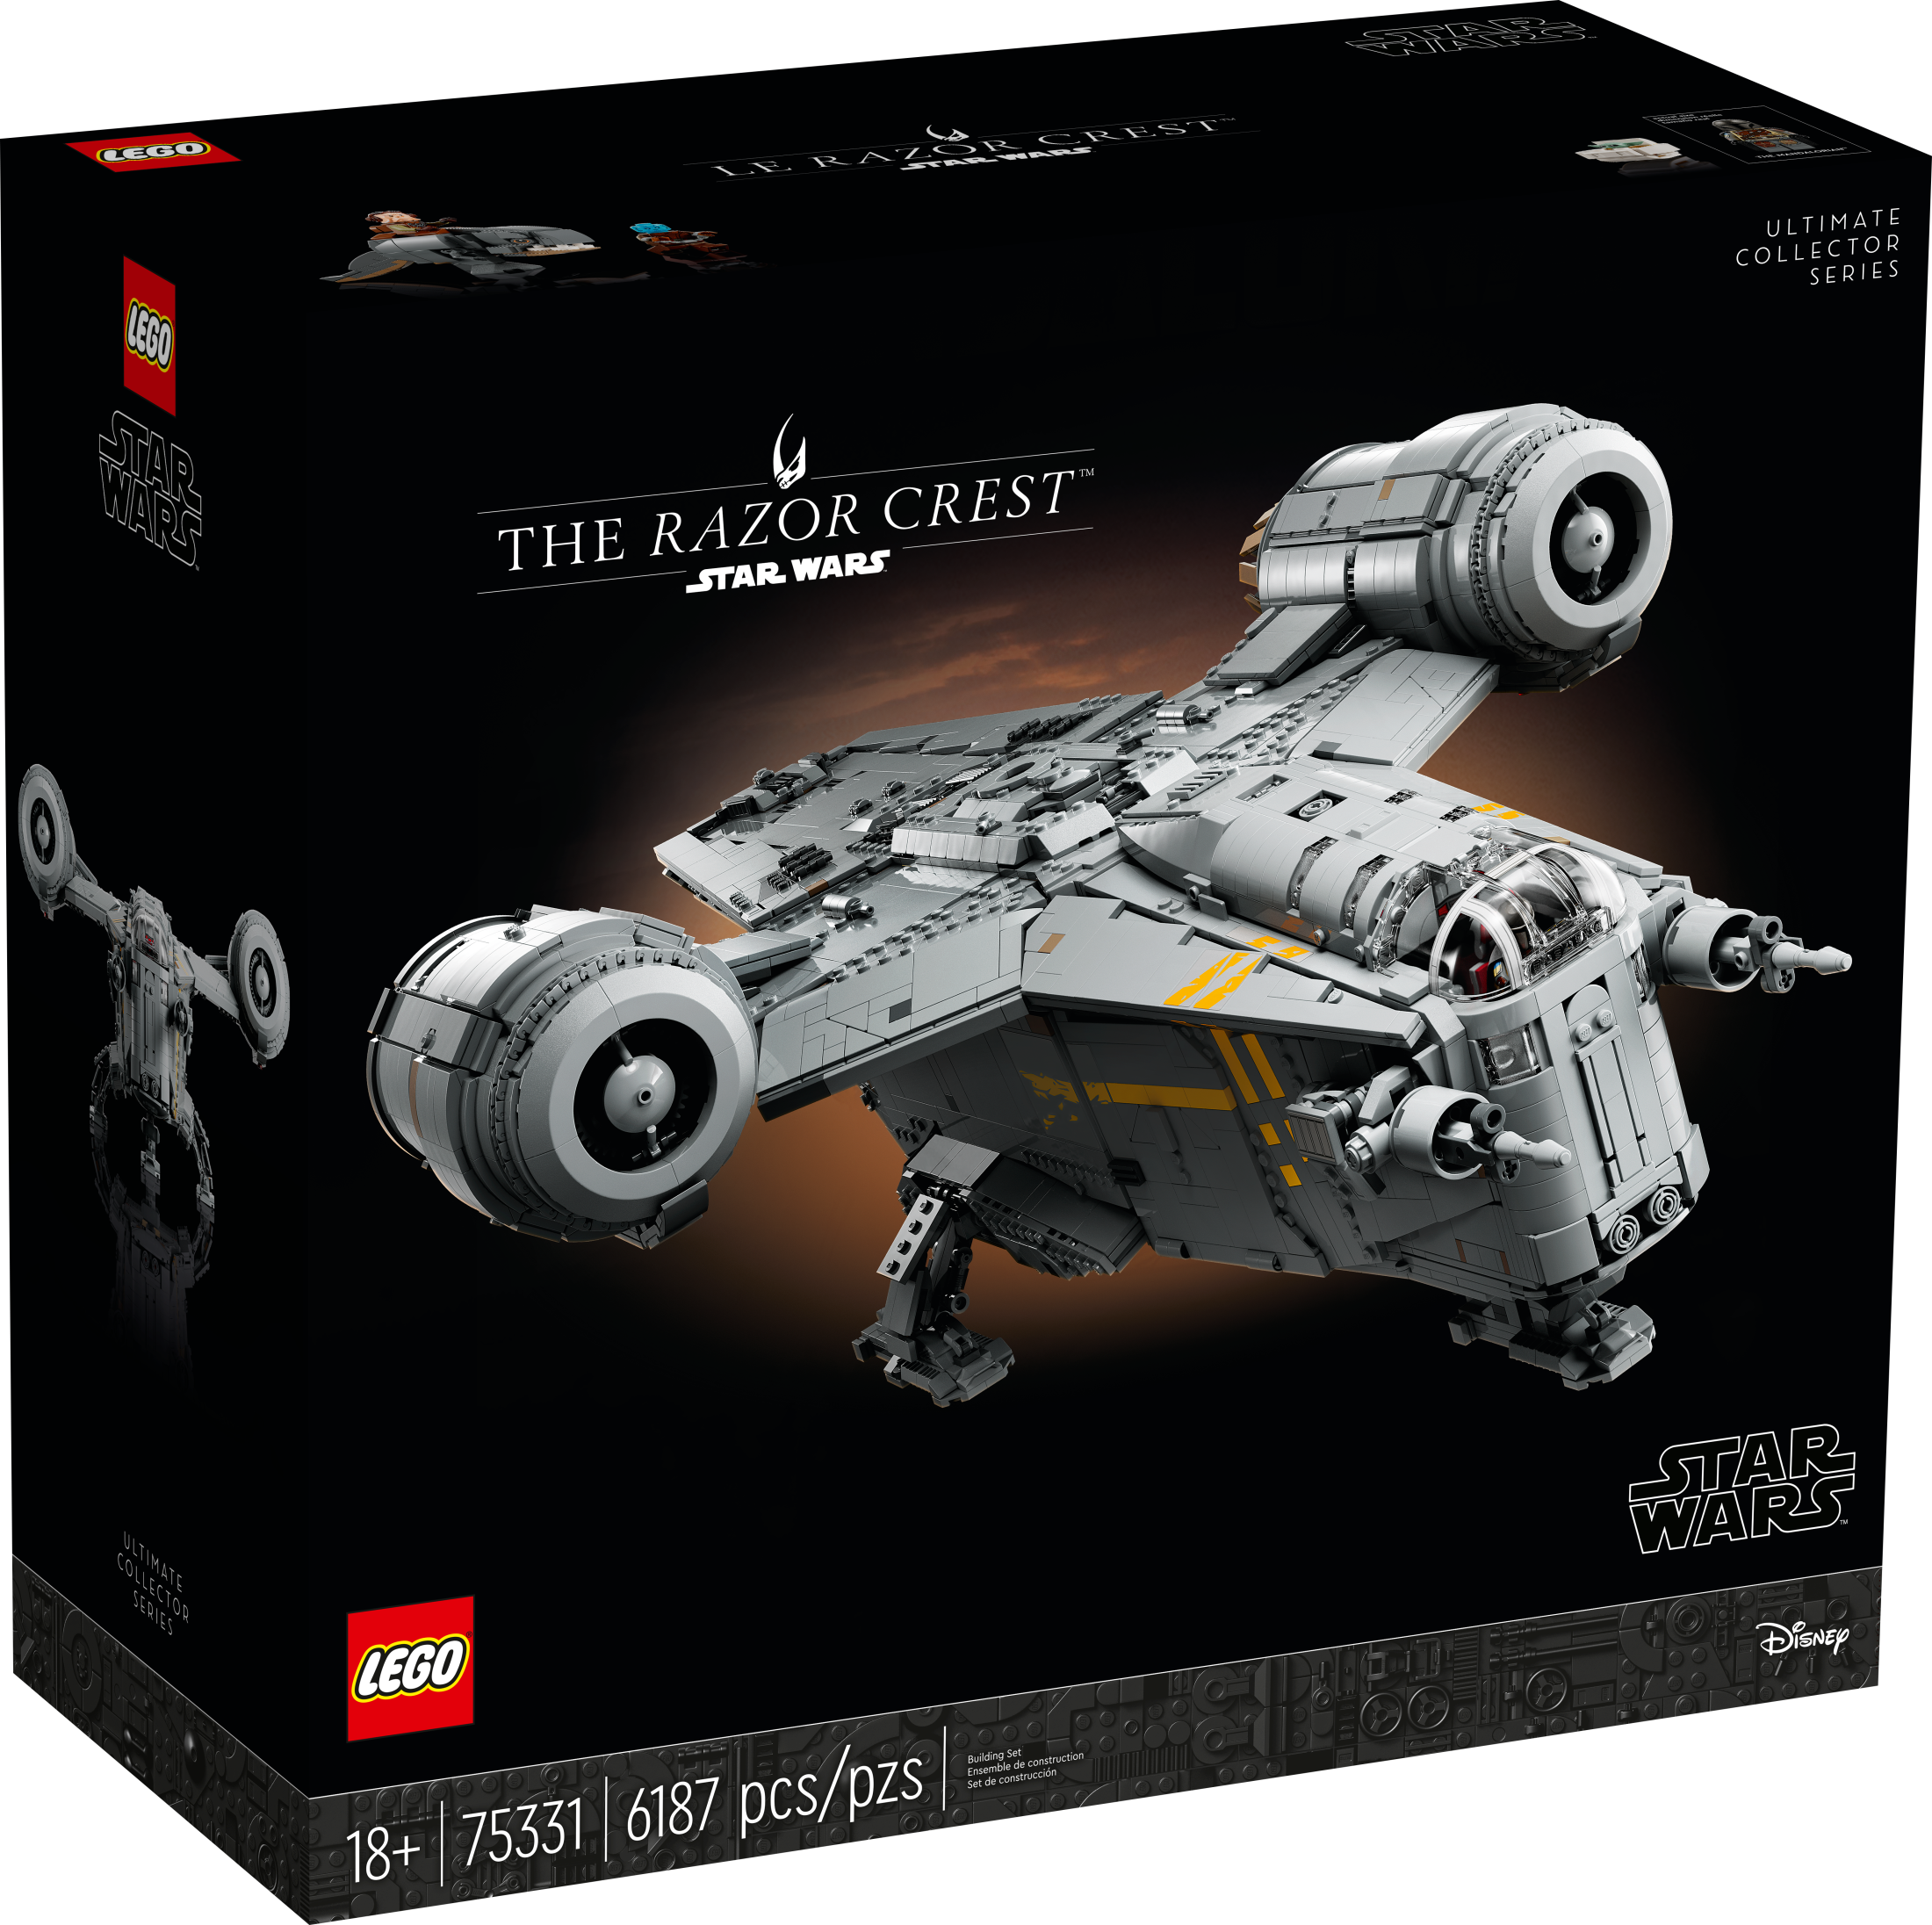 LEGO Star Wars The Razor Crest UCS Starship Set, May the 4th Collectible Model Kit for Adults, Iconic Mandalorian Memorabilia, Great Gift for Star Wars Fans, 75331 - image 4 of 9